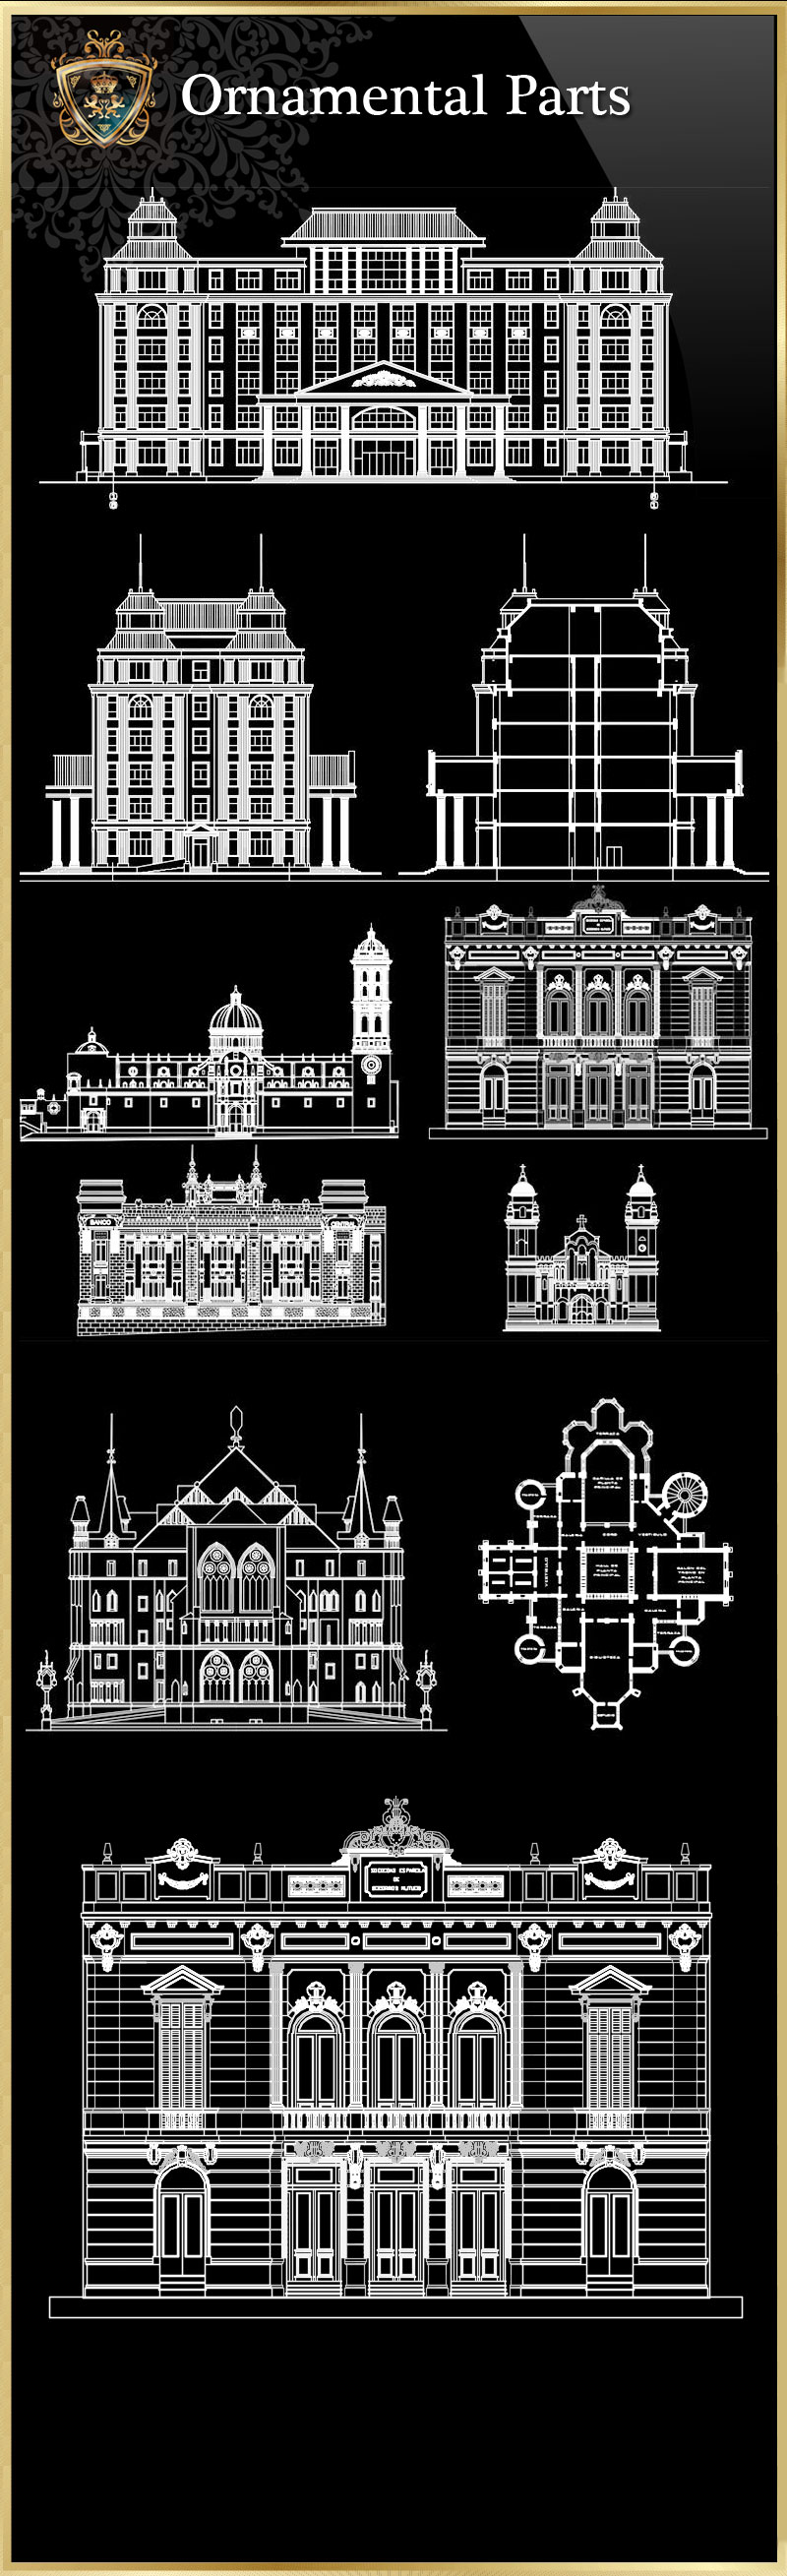 ★【Ornamental Parts of Buildings 4】Download Luxury Architectural Design CAD Drawings--Over 20000+ High quality CAD Blocks and Drawings Download!